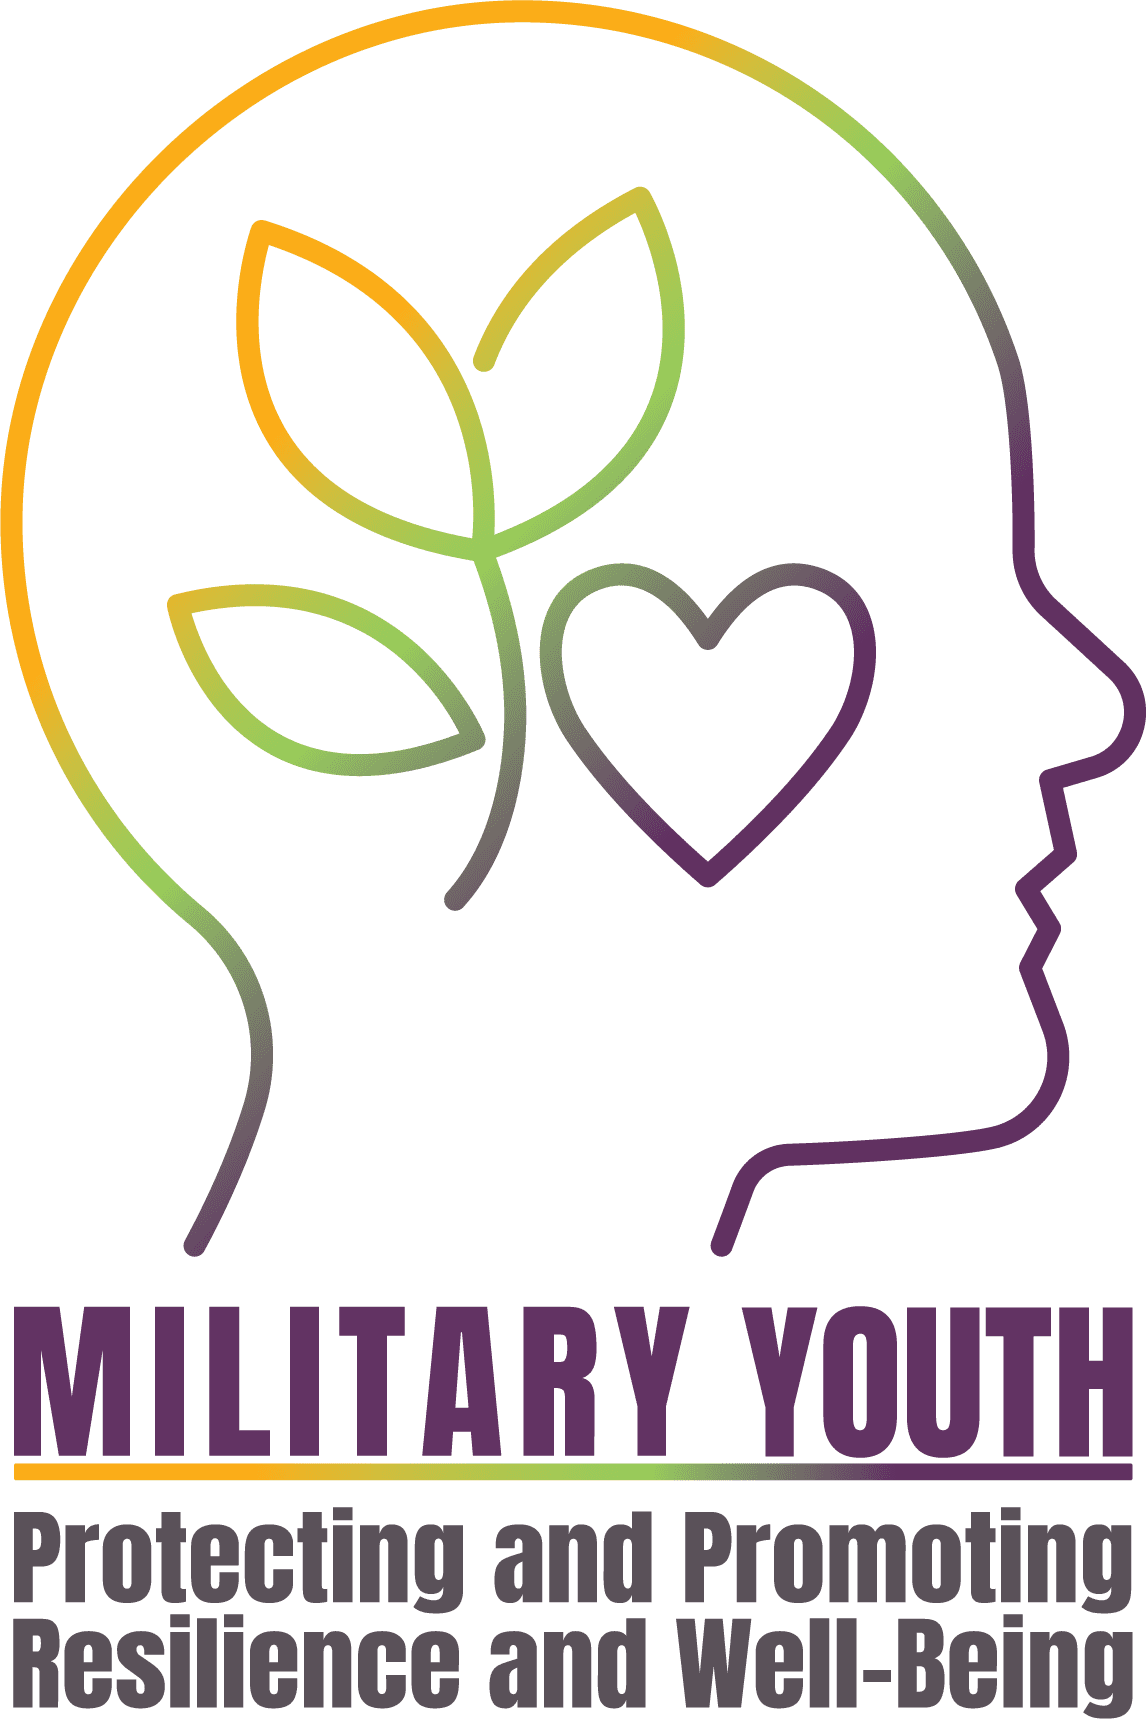 Military Youth: Protecting and Promoting Resilience and Well-Being logo